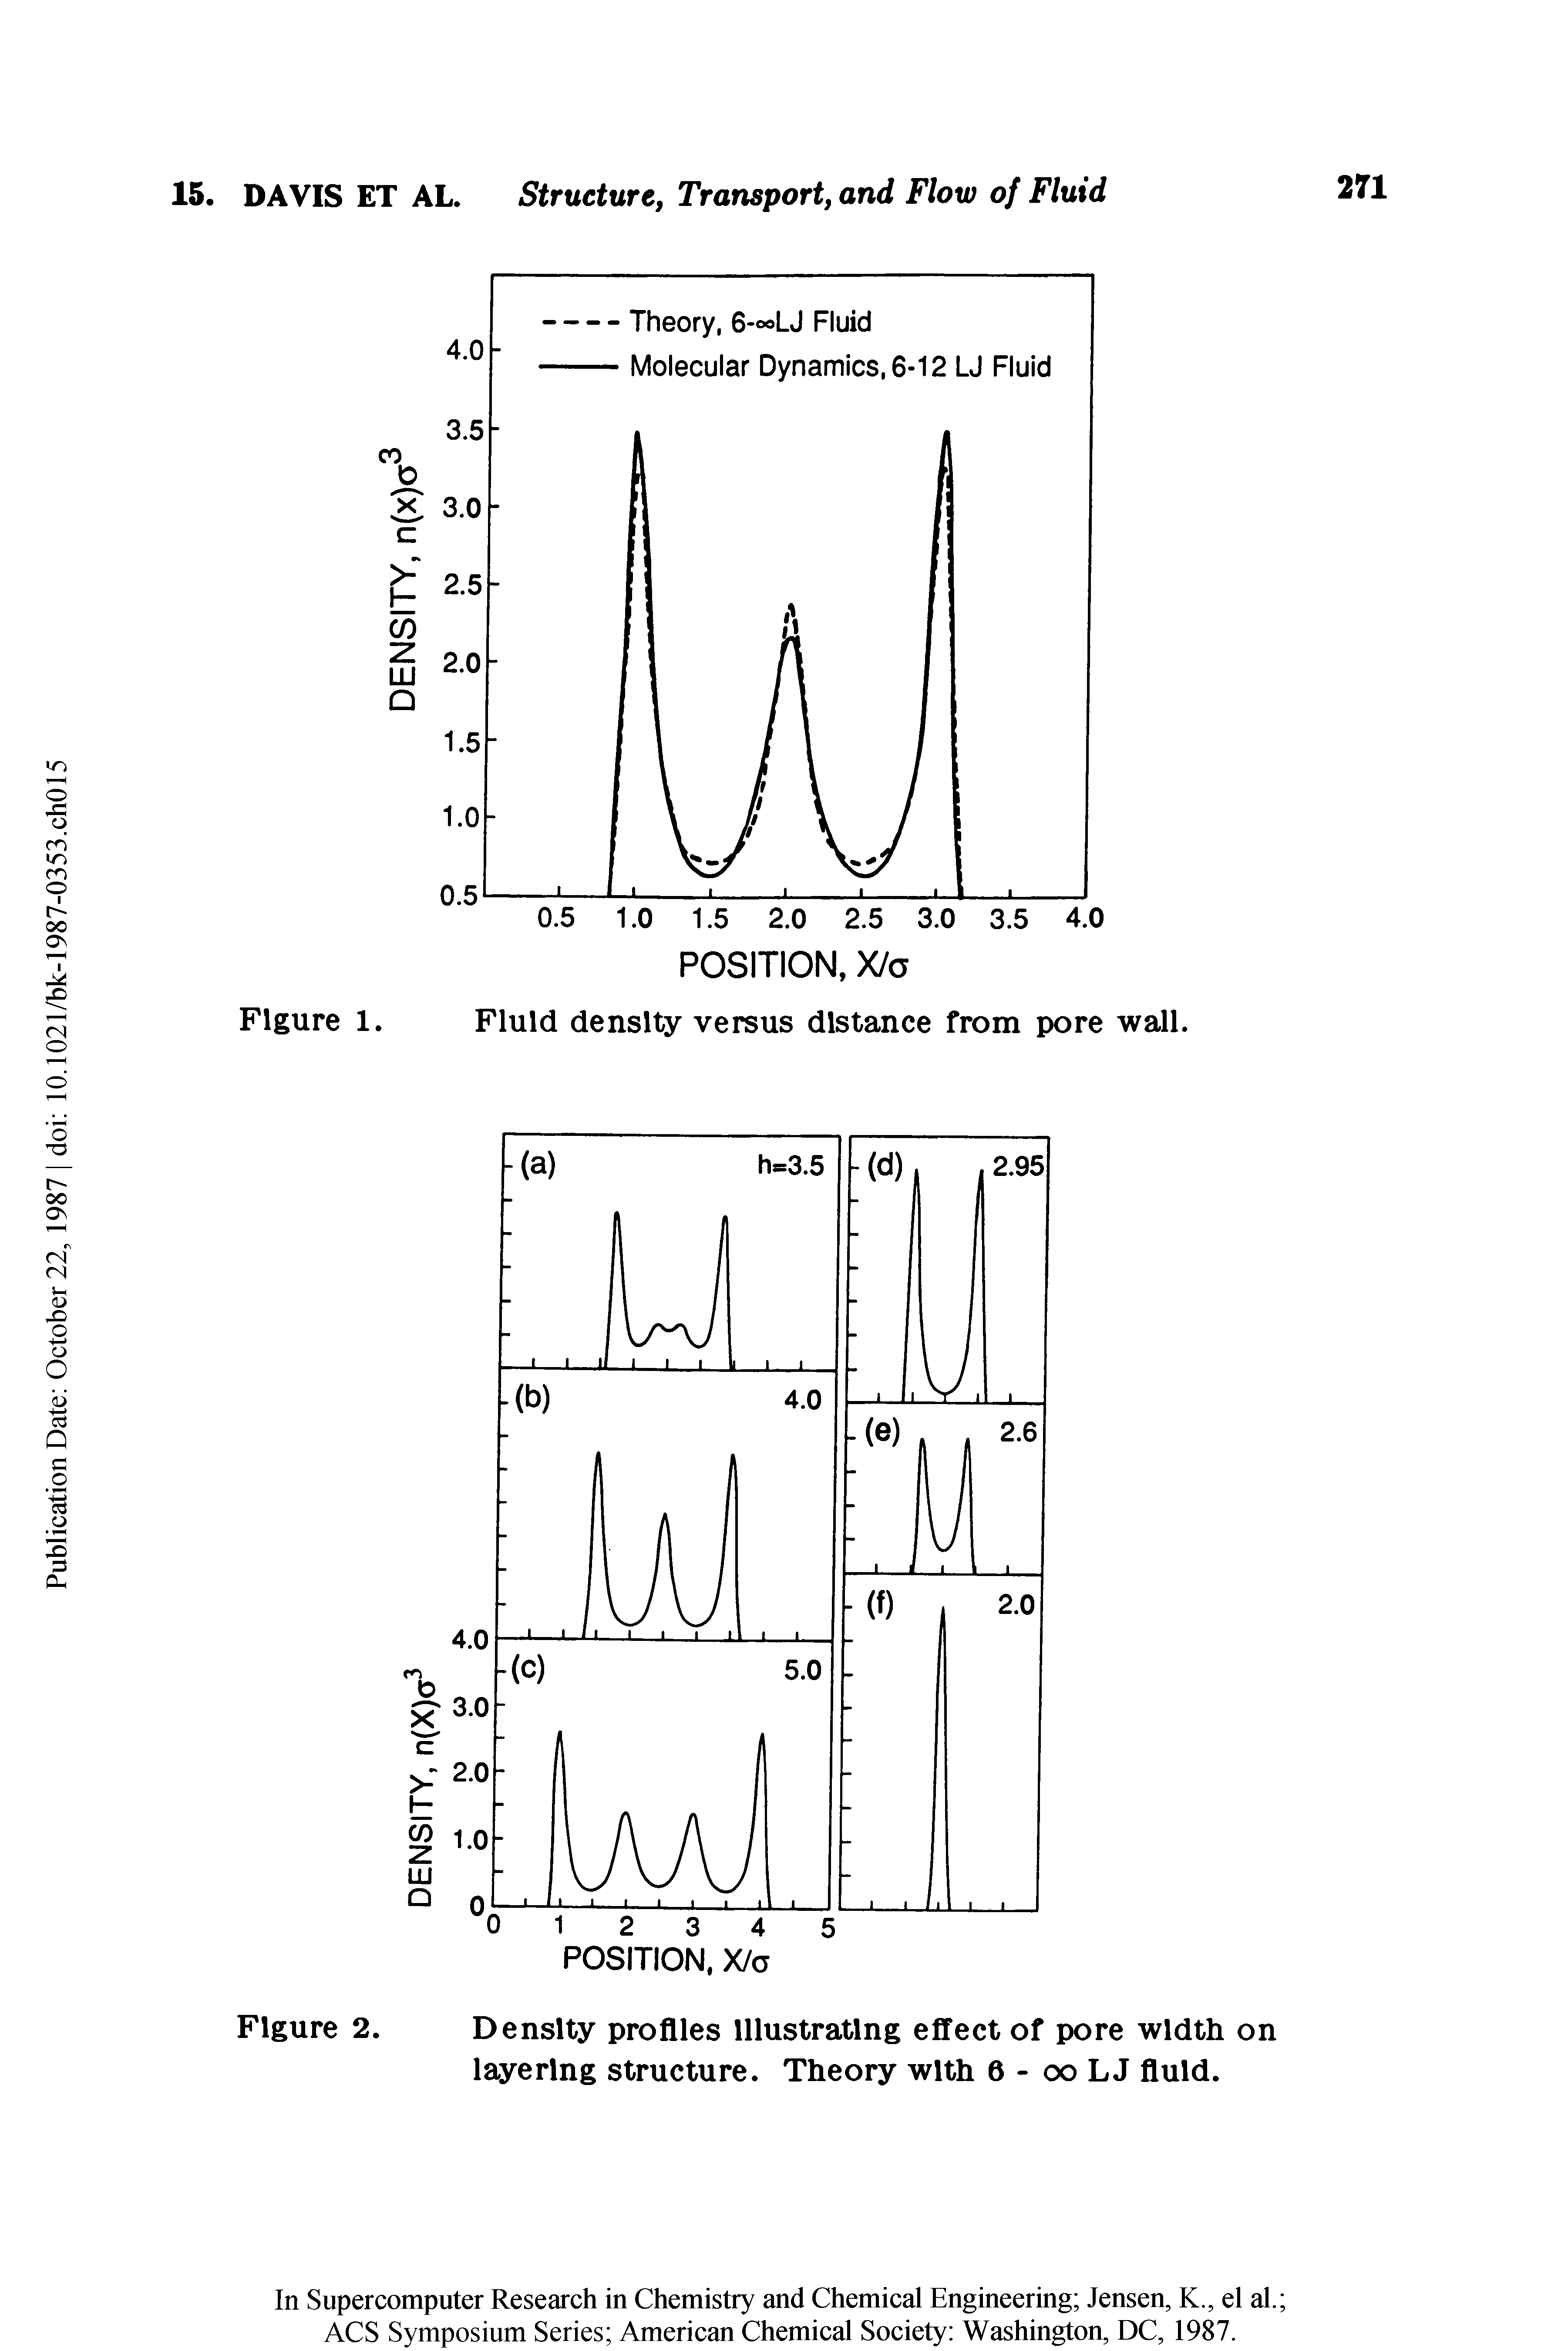 Figure 2. Density profiles Illustrating effect of pore width on layering structure. Theory with 6 - oo LJ fluid.